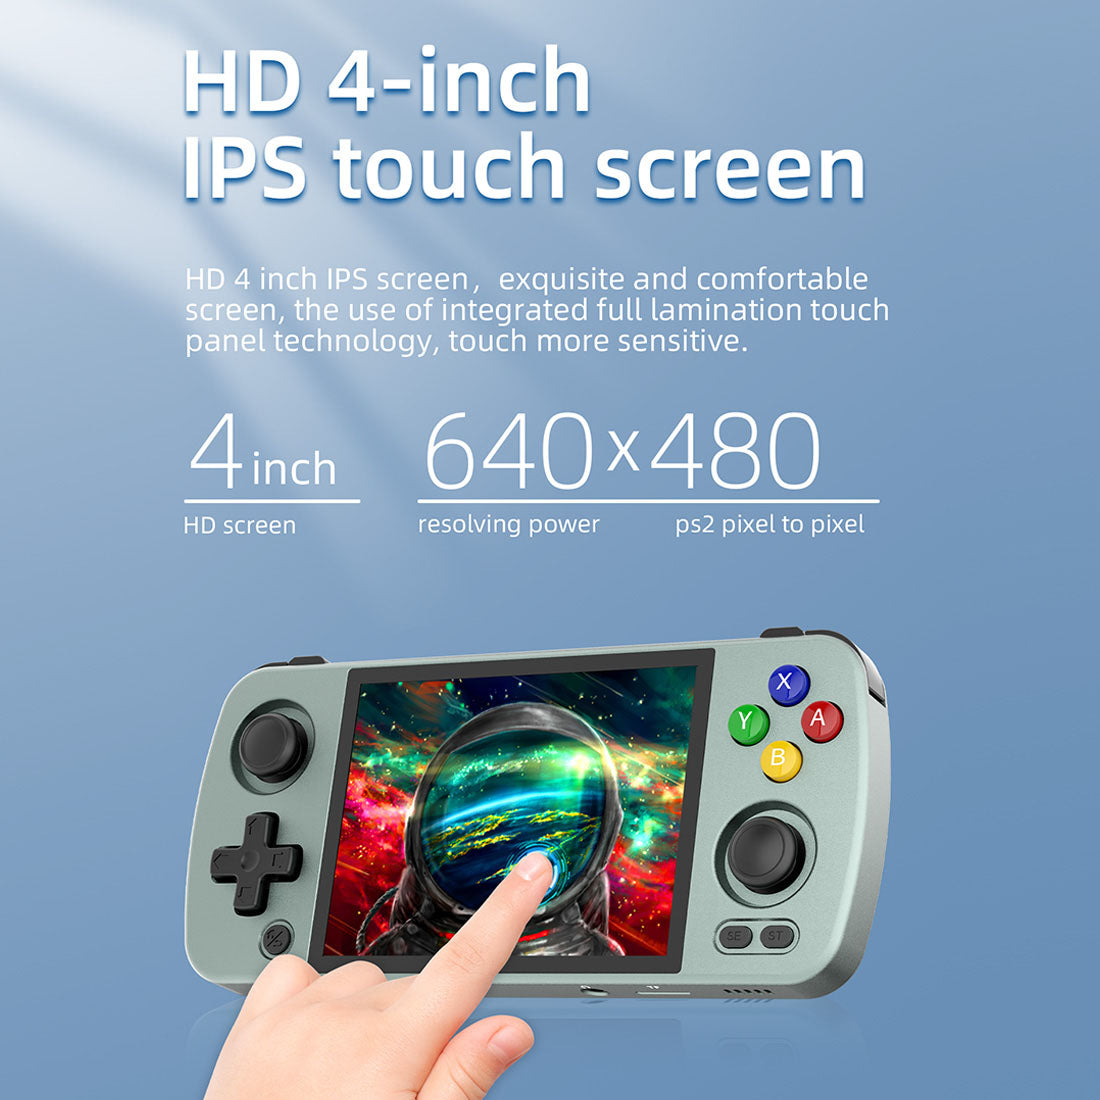 ANBERNIC RG405M Handheld Steam Handheld Console 4 IPS Touch Screen